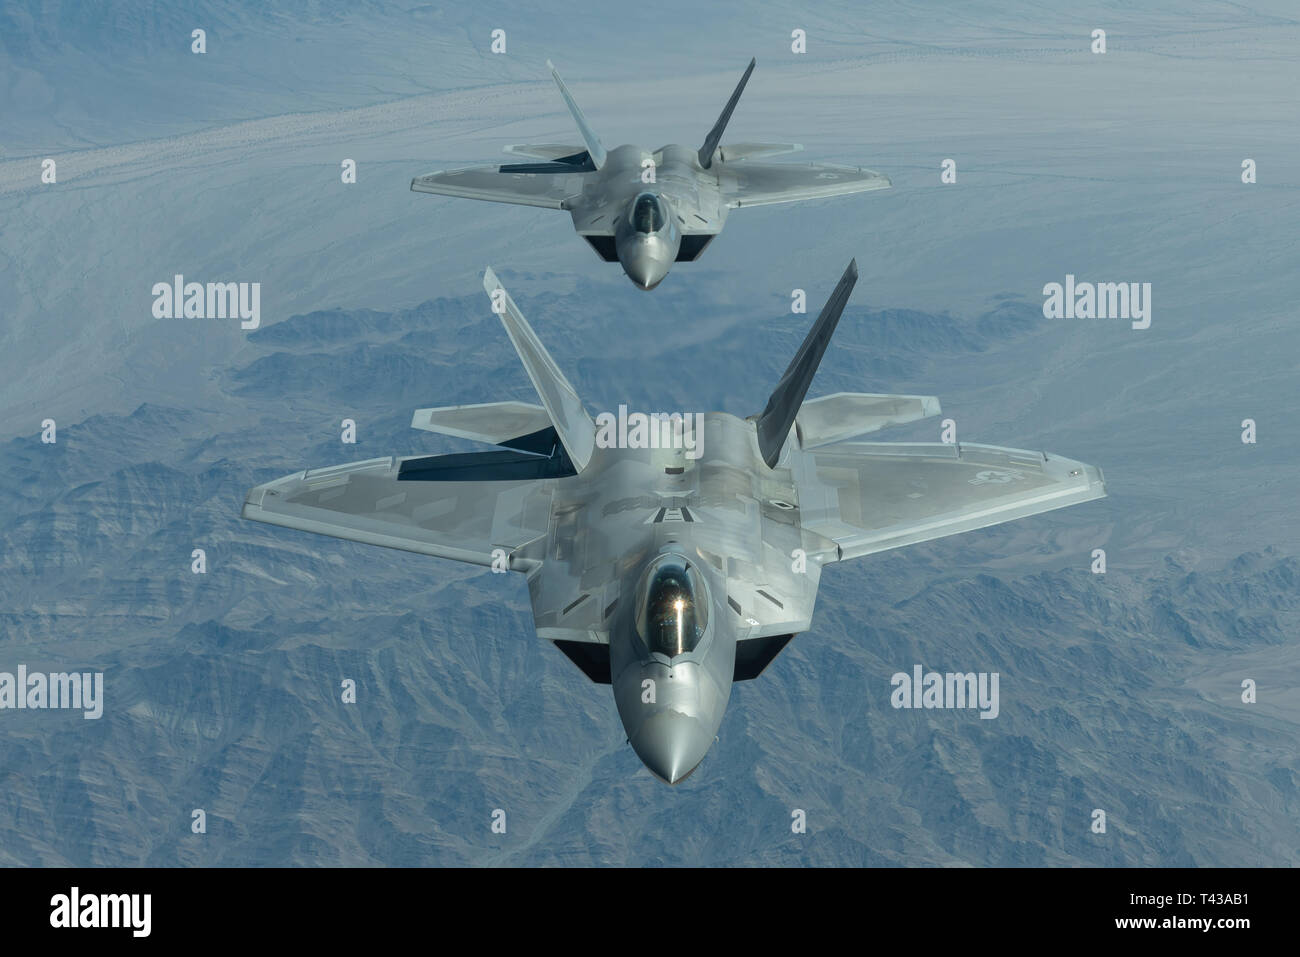 U.S. Air Force Maj. Paul 'Loco' Lopez, F-22 Demo Team pilot/commander, and 1st Lt. Cory Clark, F-22 Demo Team safety observer, fly in formation over the skies of Northern California while en route to Travis Air Force Base for the Thunder Over the Bay air show March 25, 2019. Both Maj. Lopez and 1st Lt. Clark received fuel along the way from a KC-10 Extender attached to the 9th Air Refueling Squadron out of Travis AFB. (U.S. Air Force photo by 2nd Lt. Samuel Eckholm) Stock Photo